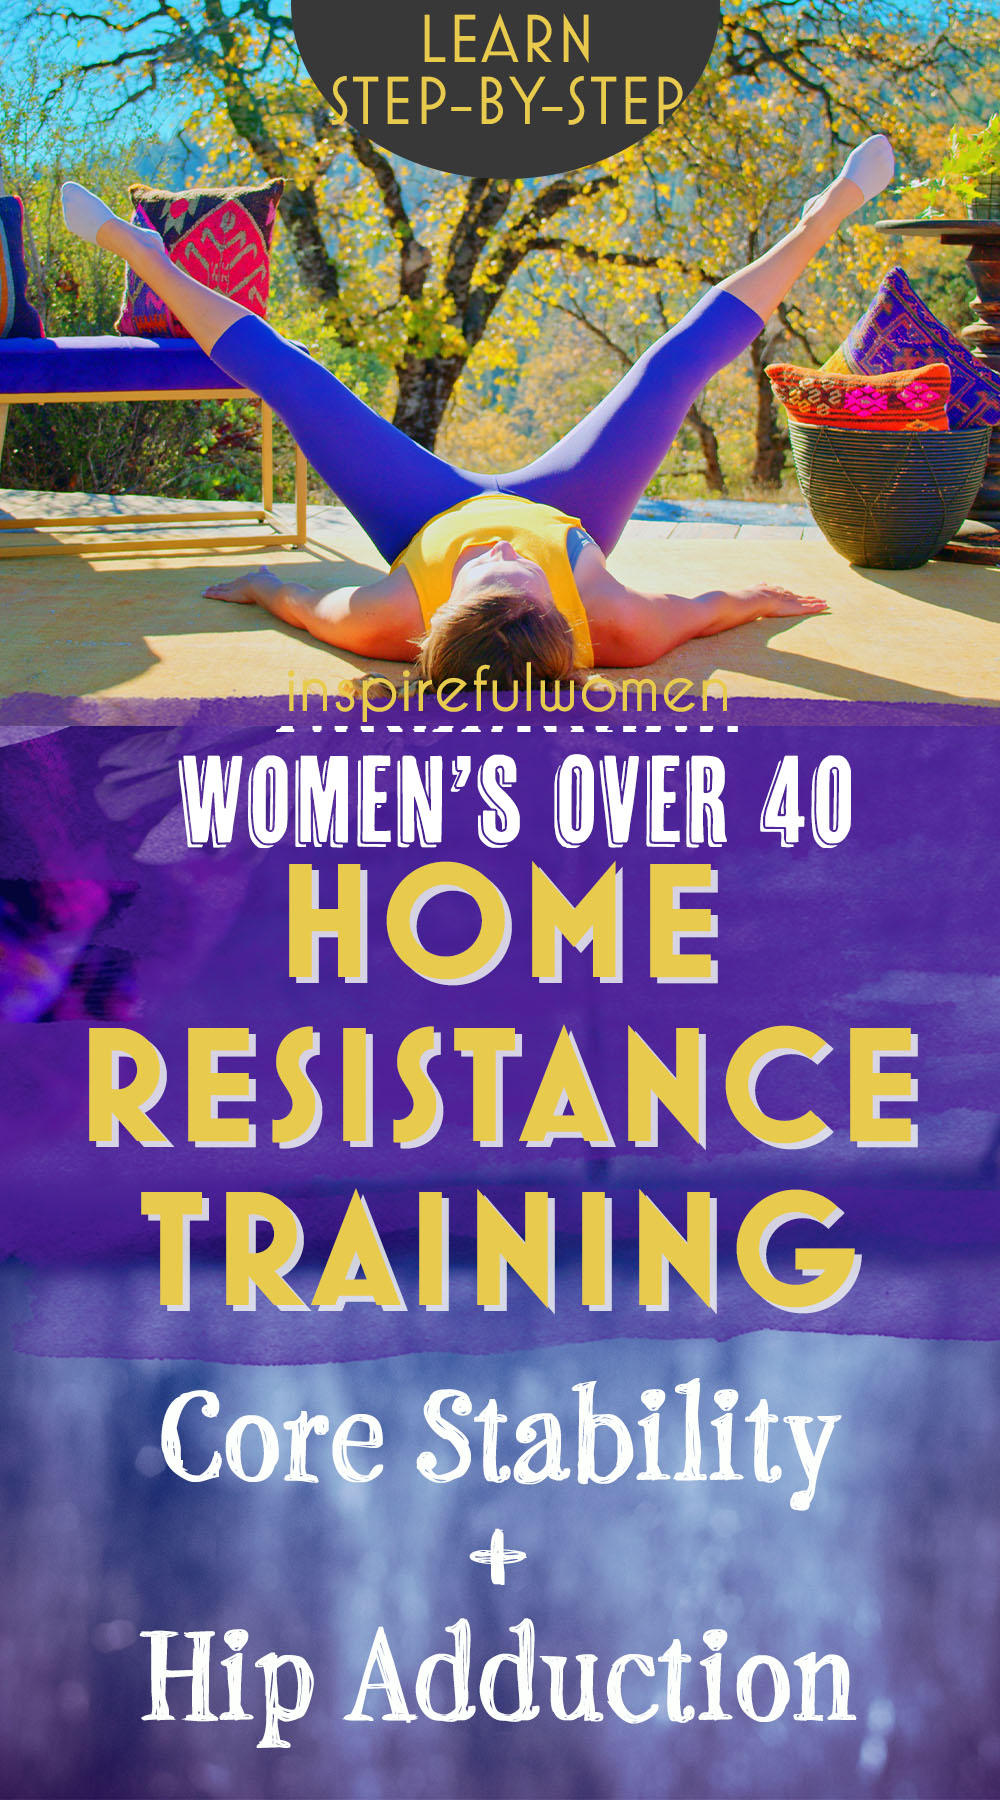 core-stability-plus-hip-adduction-core-strengthening-exercise-at-home-women-40+